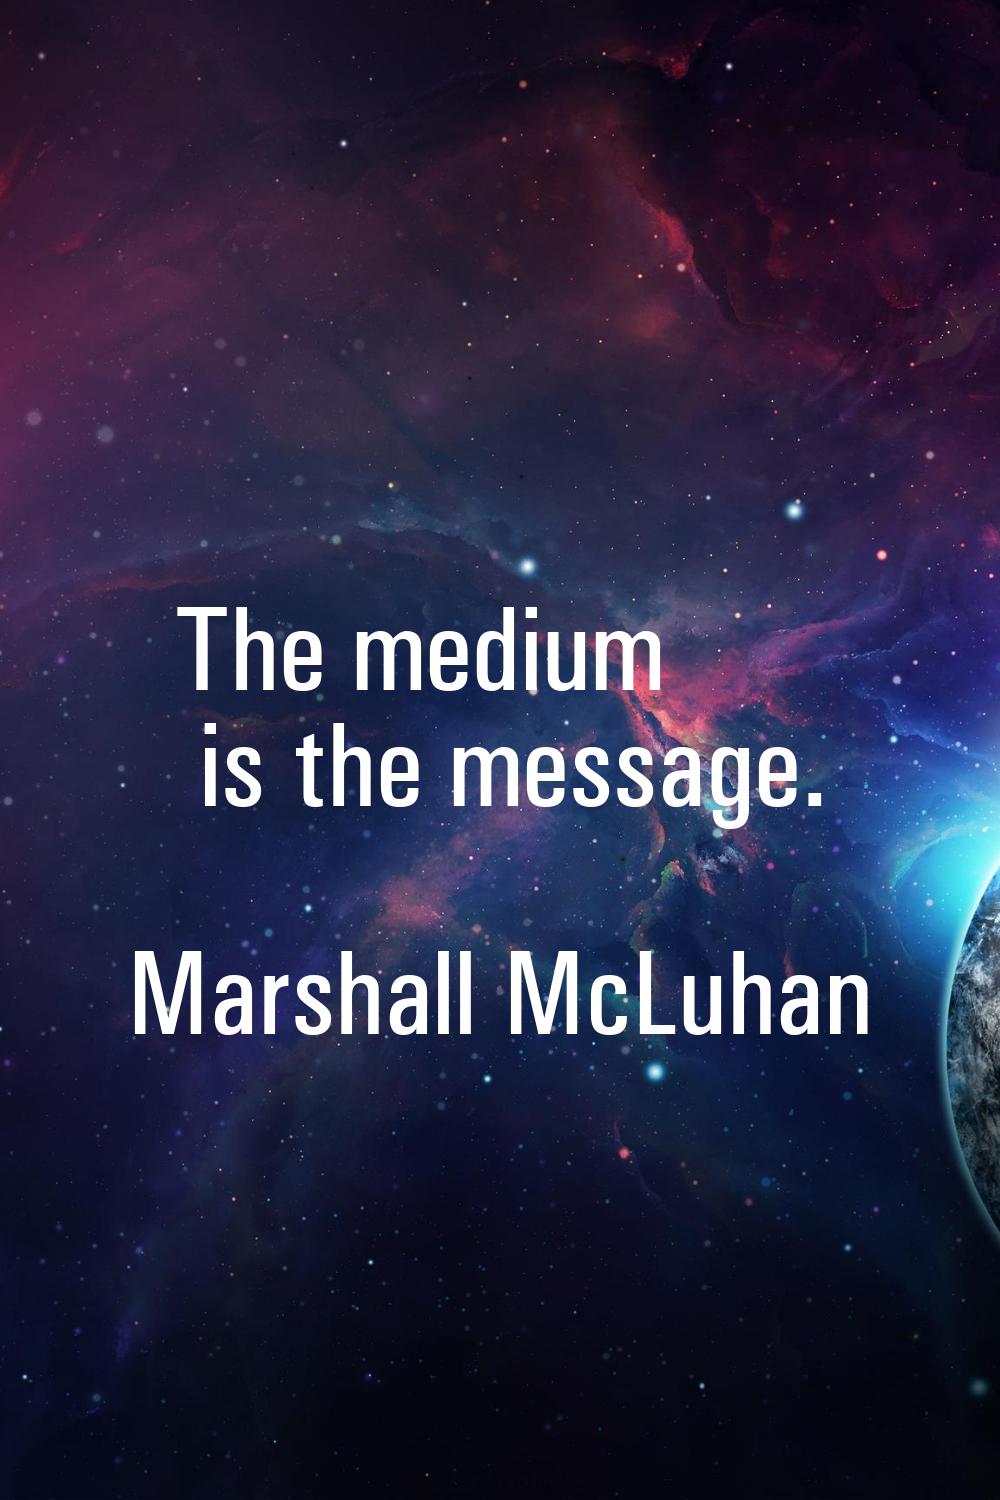 The medium is the message.